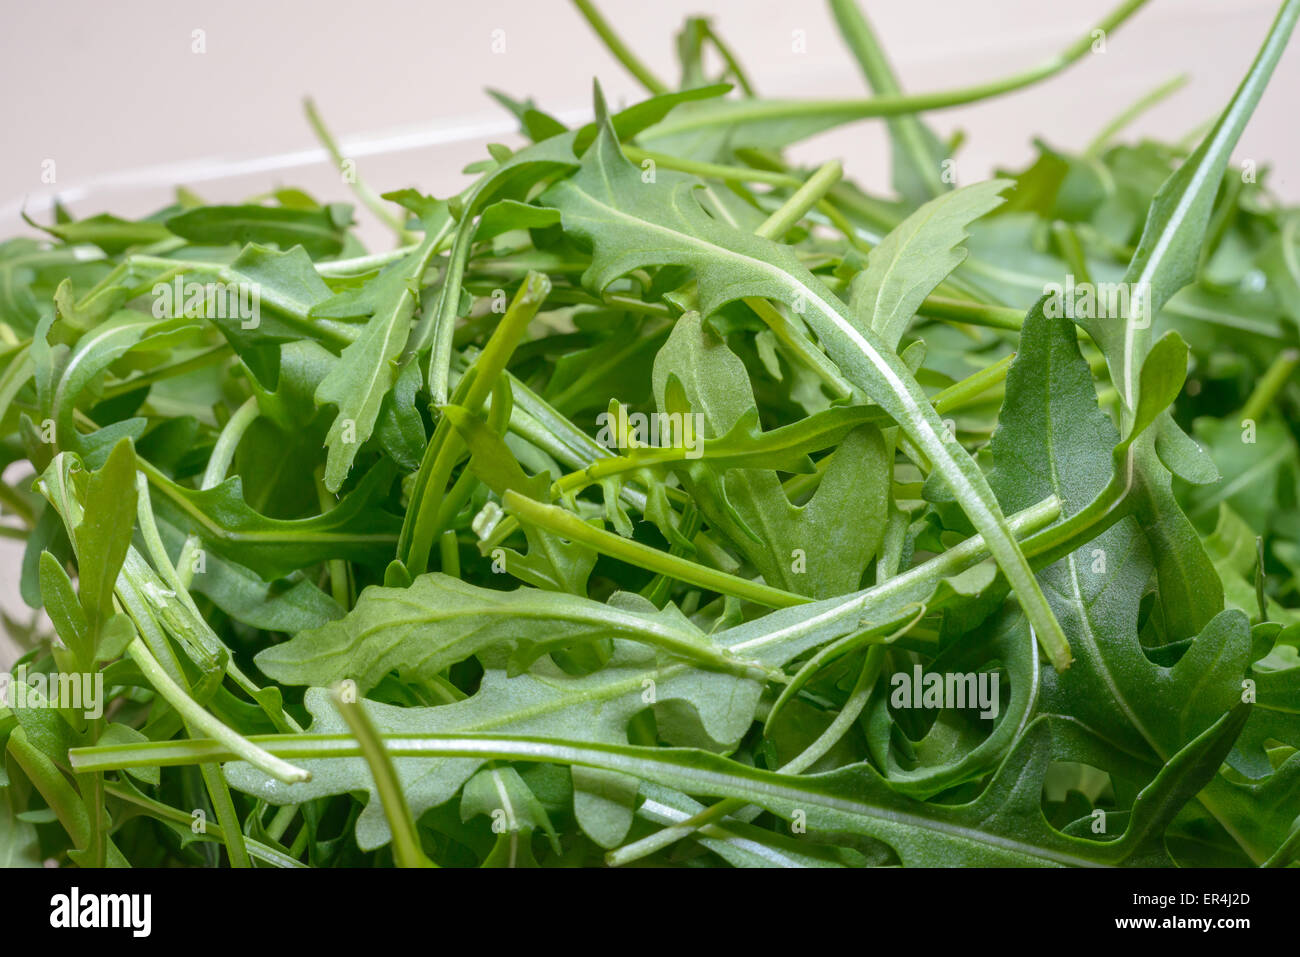 Rucola vegetable, nice to find it in a fresh salad Stock Photo